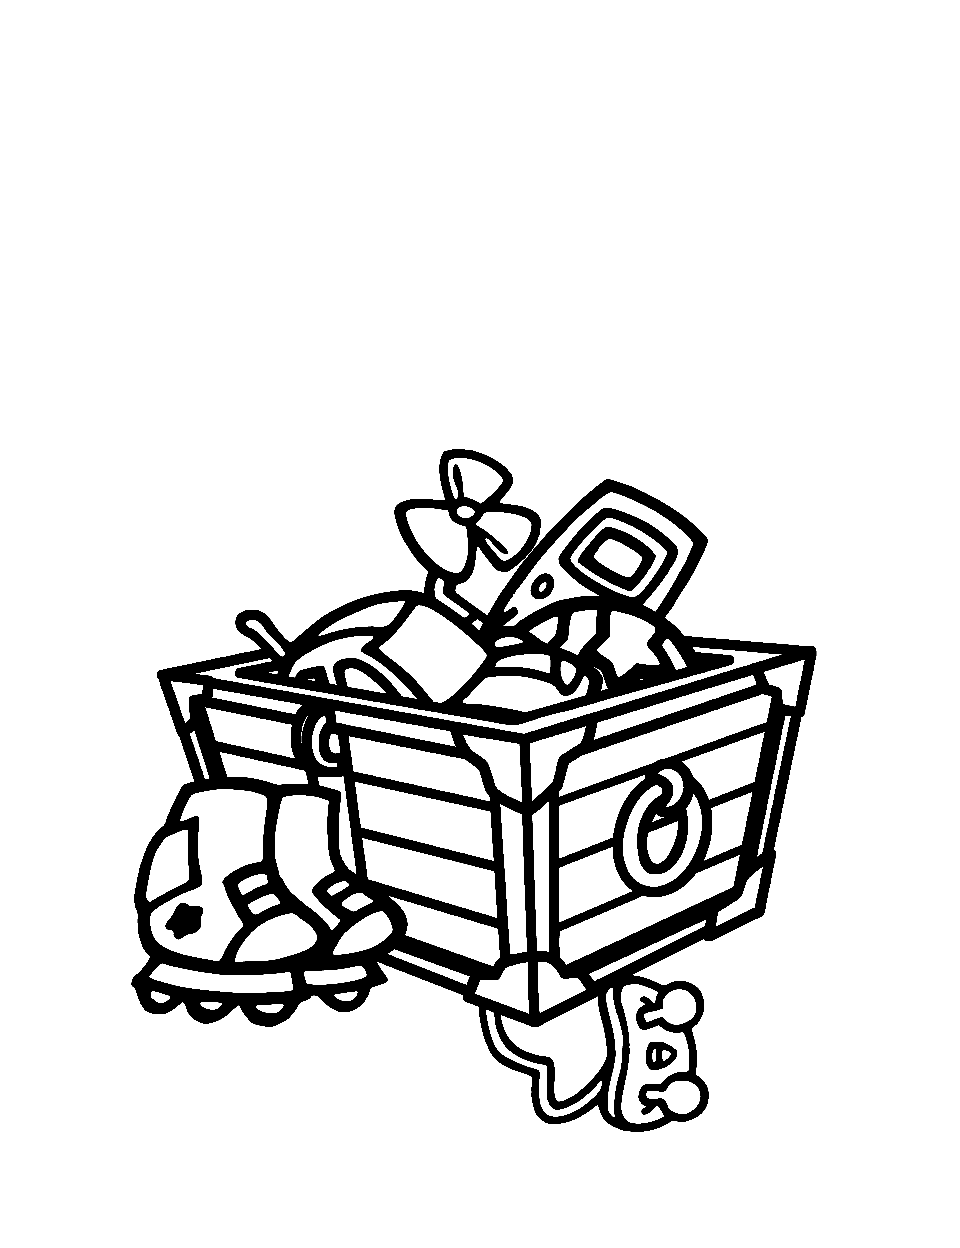 Toy Box Treasures Coloring Page - An open toy box filled with various toys.